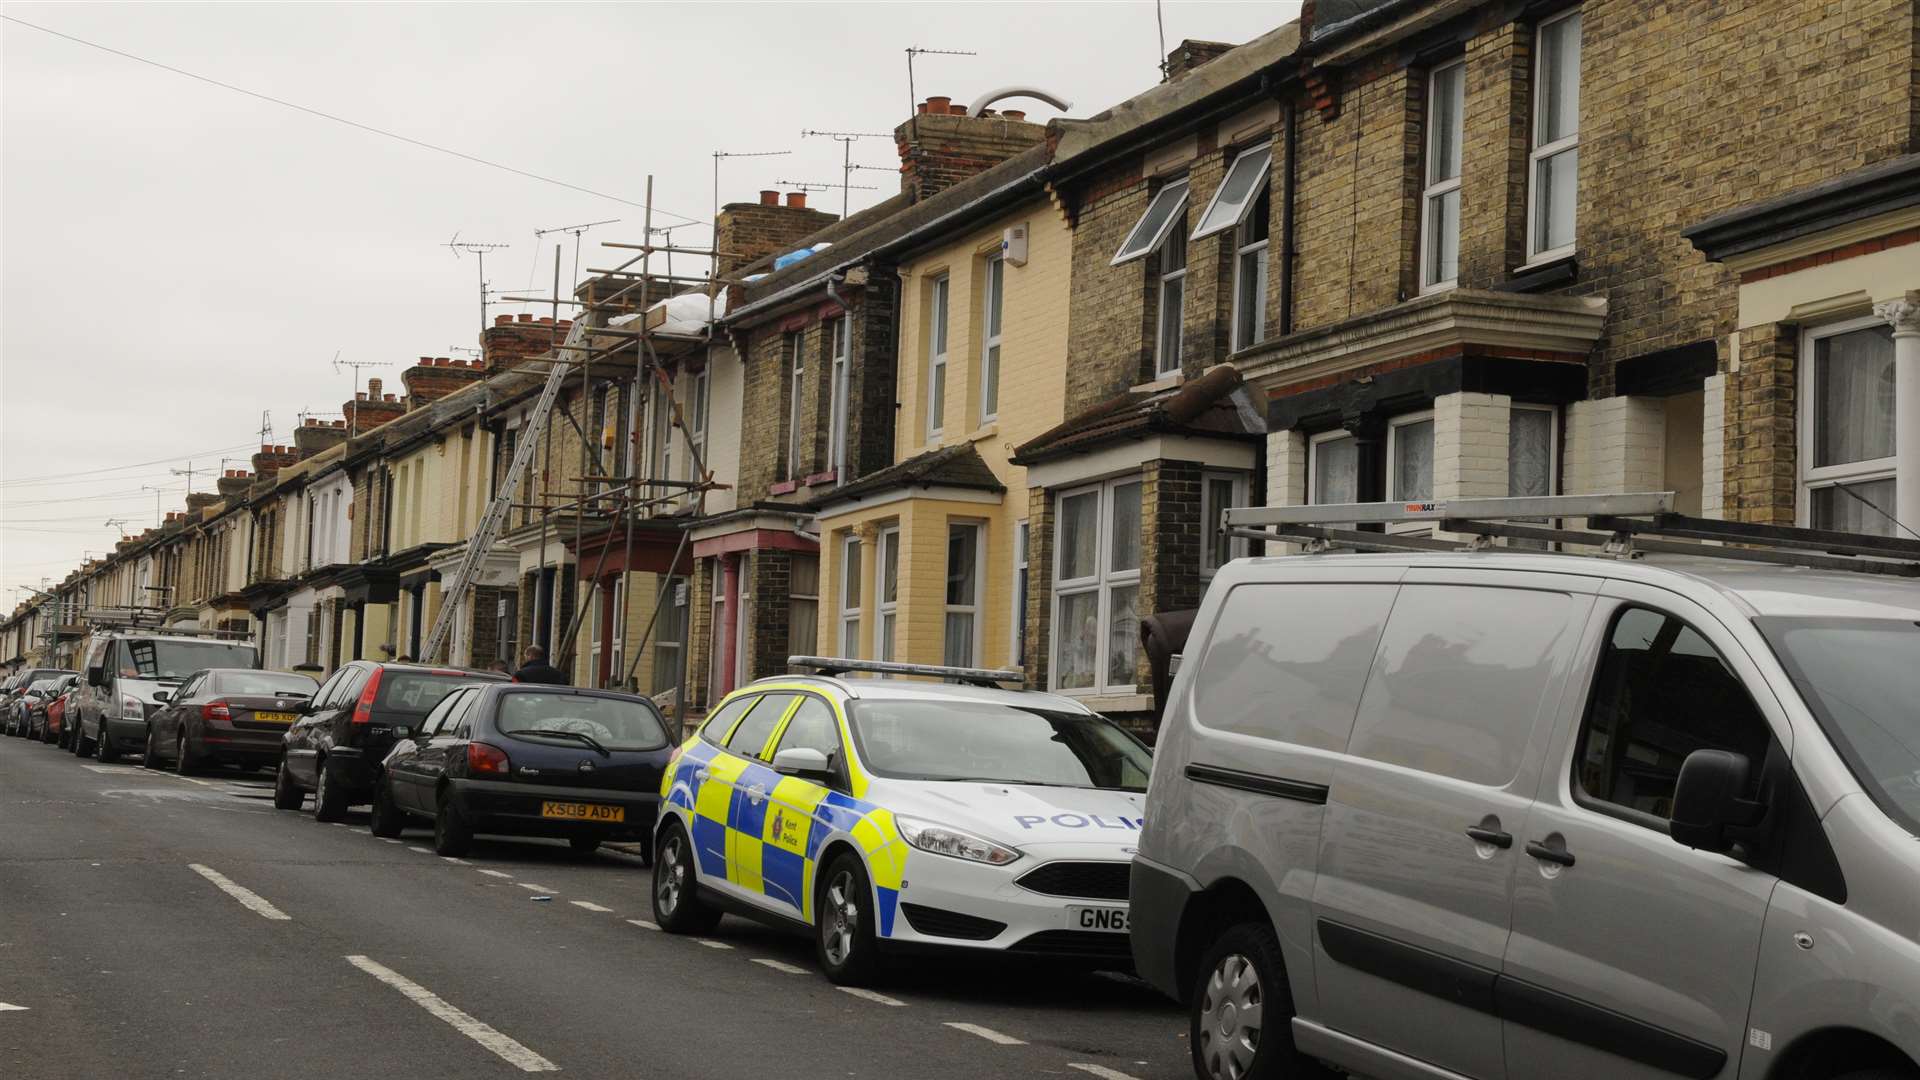 Police guarded the house in Priestfield Road, after the boy was found ill.